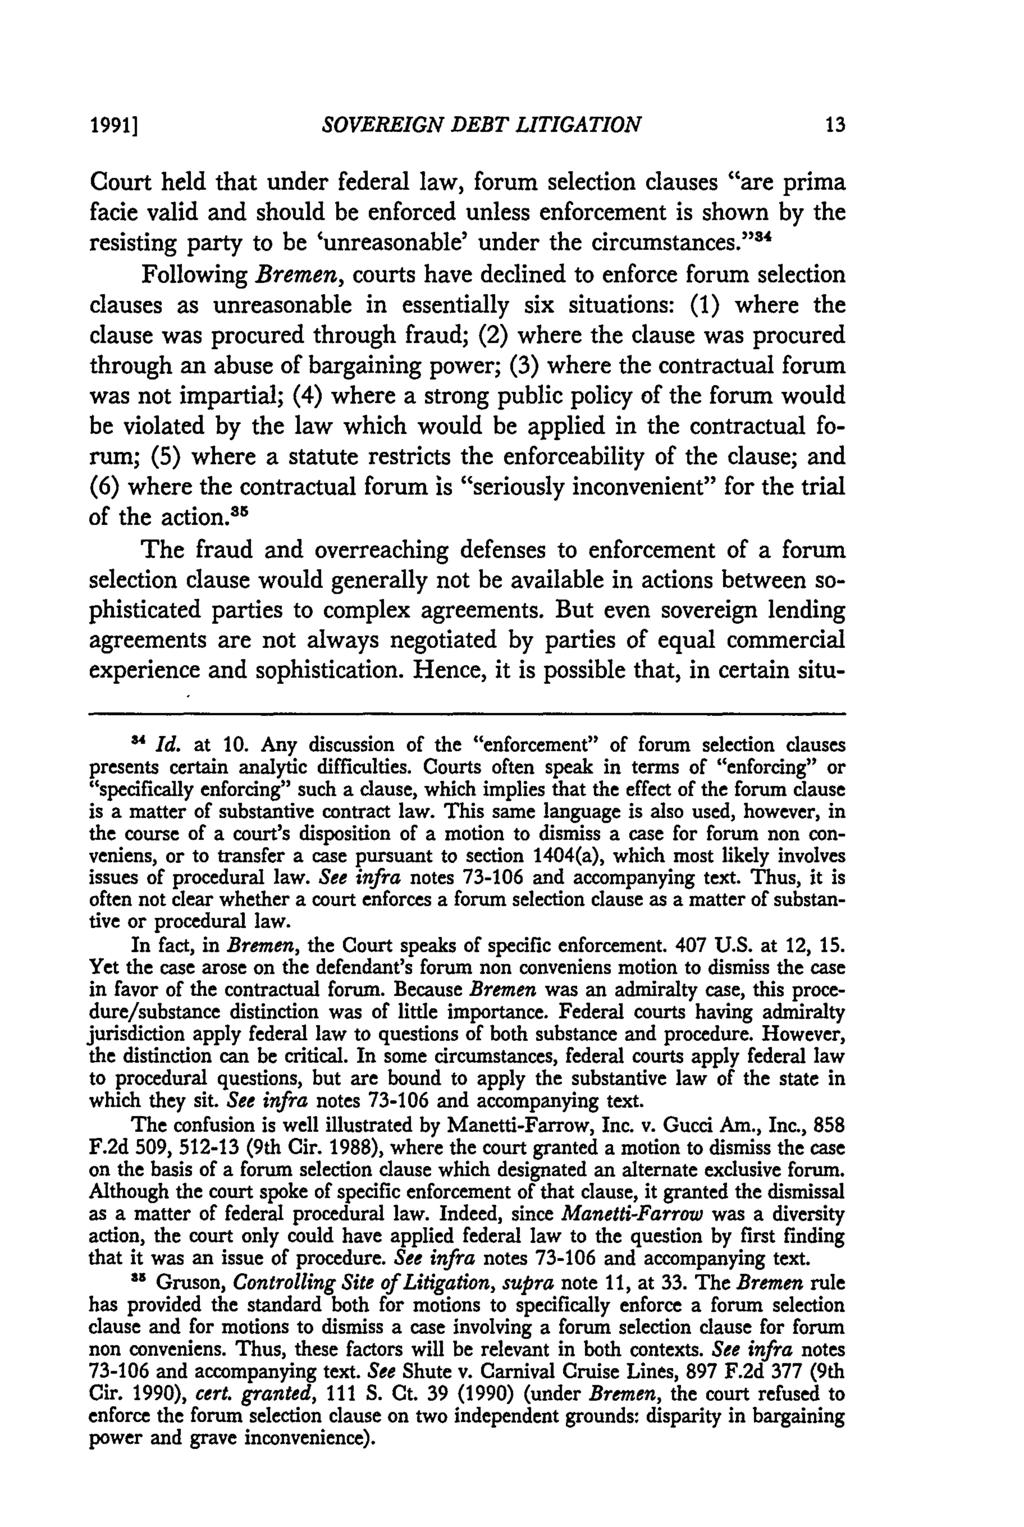 1991] SOVEREIGN DEBT LITIGATION Court held that under federal law, forum selection clauses "are prima facie valid and should be enforced unless enforcement is shown by the resisting party to be